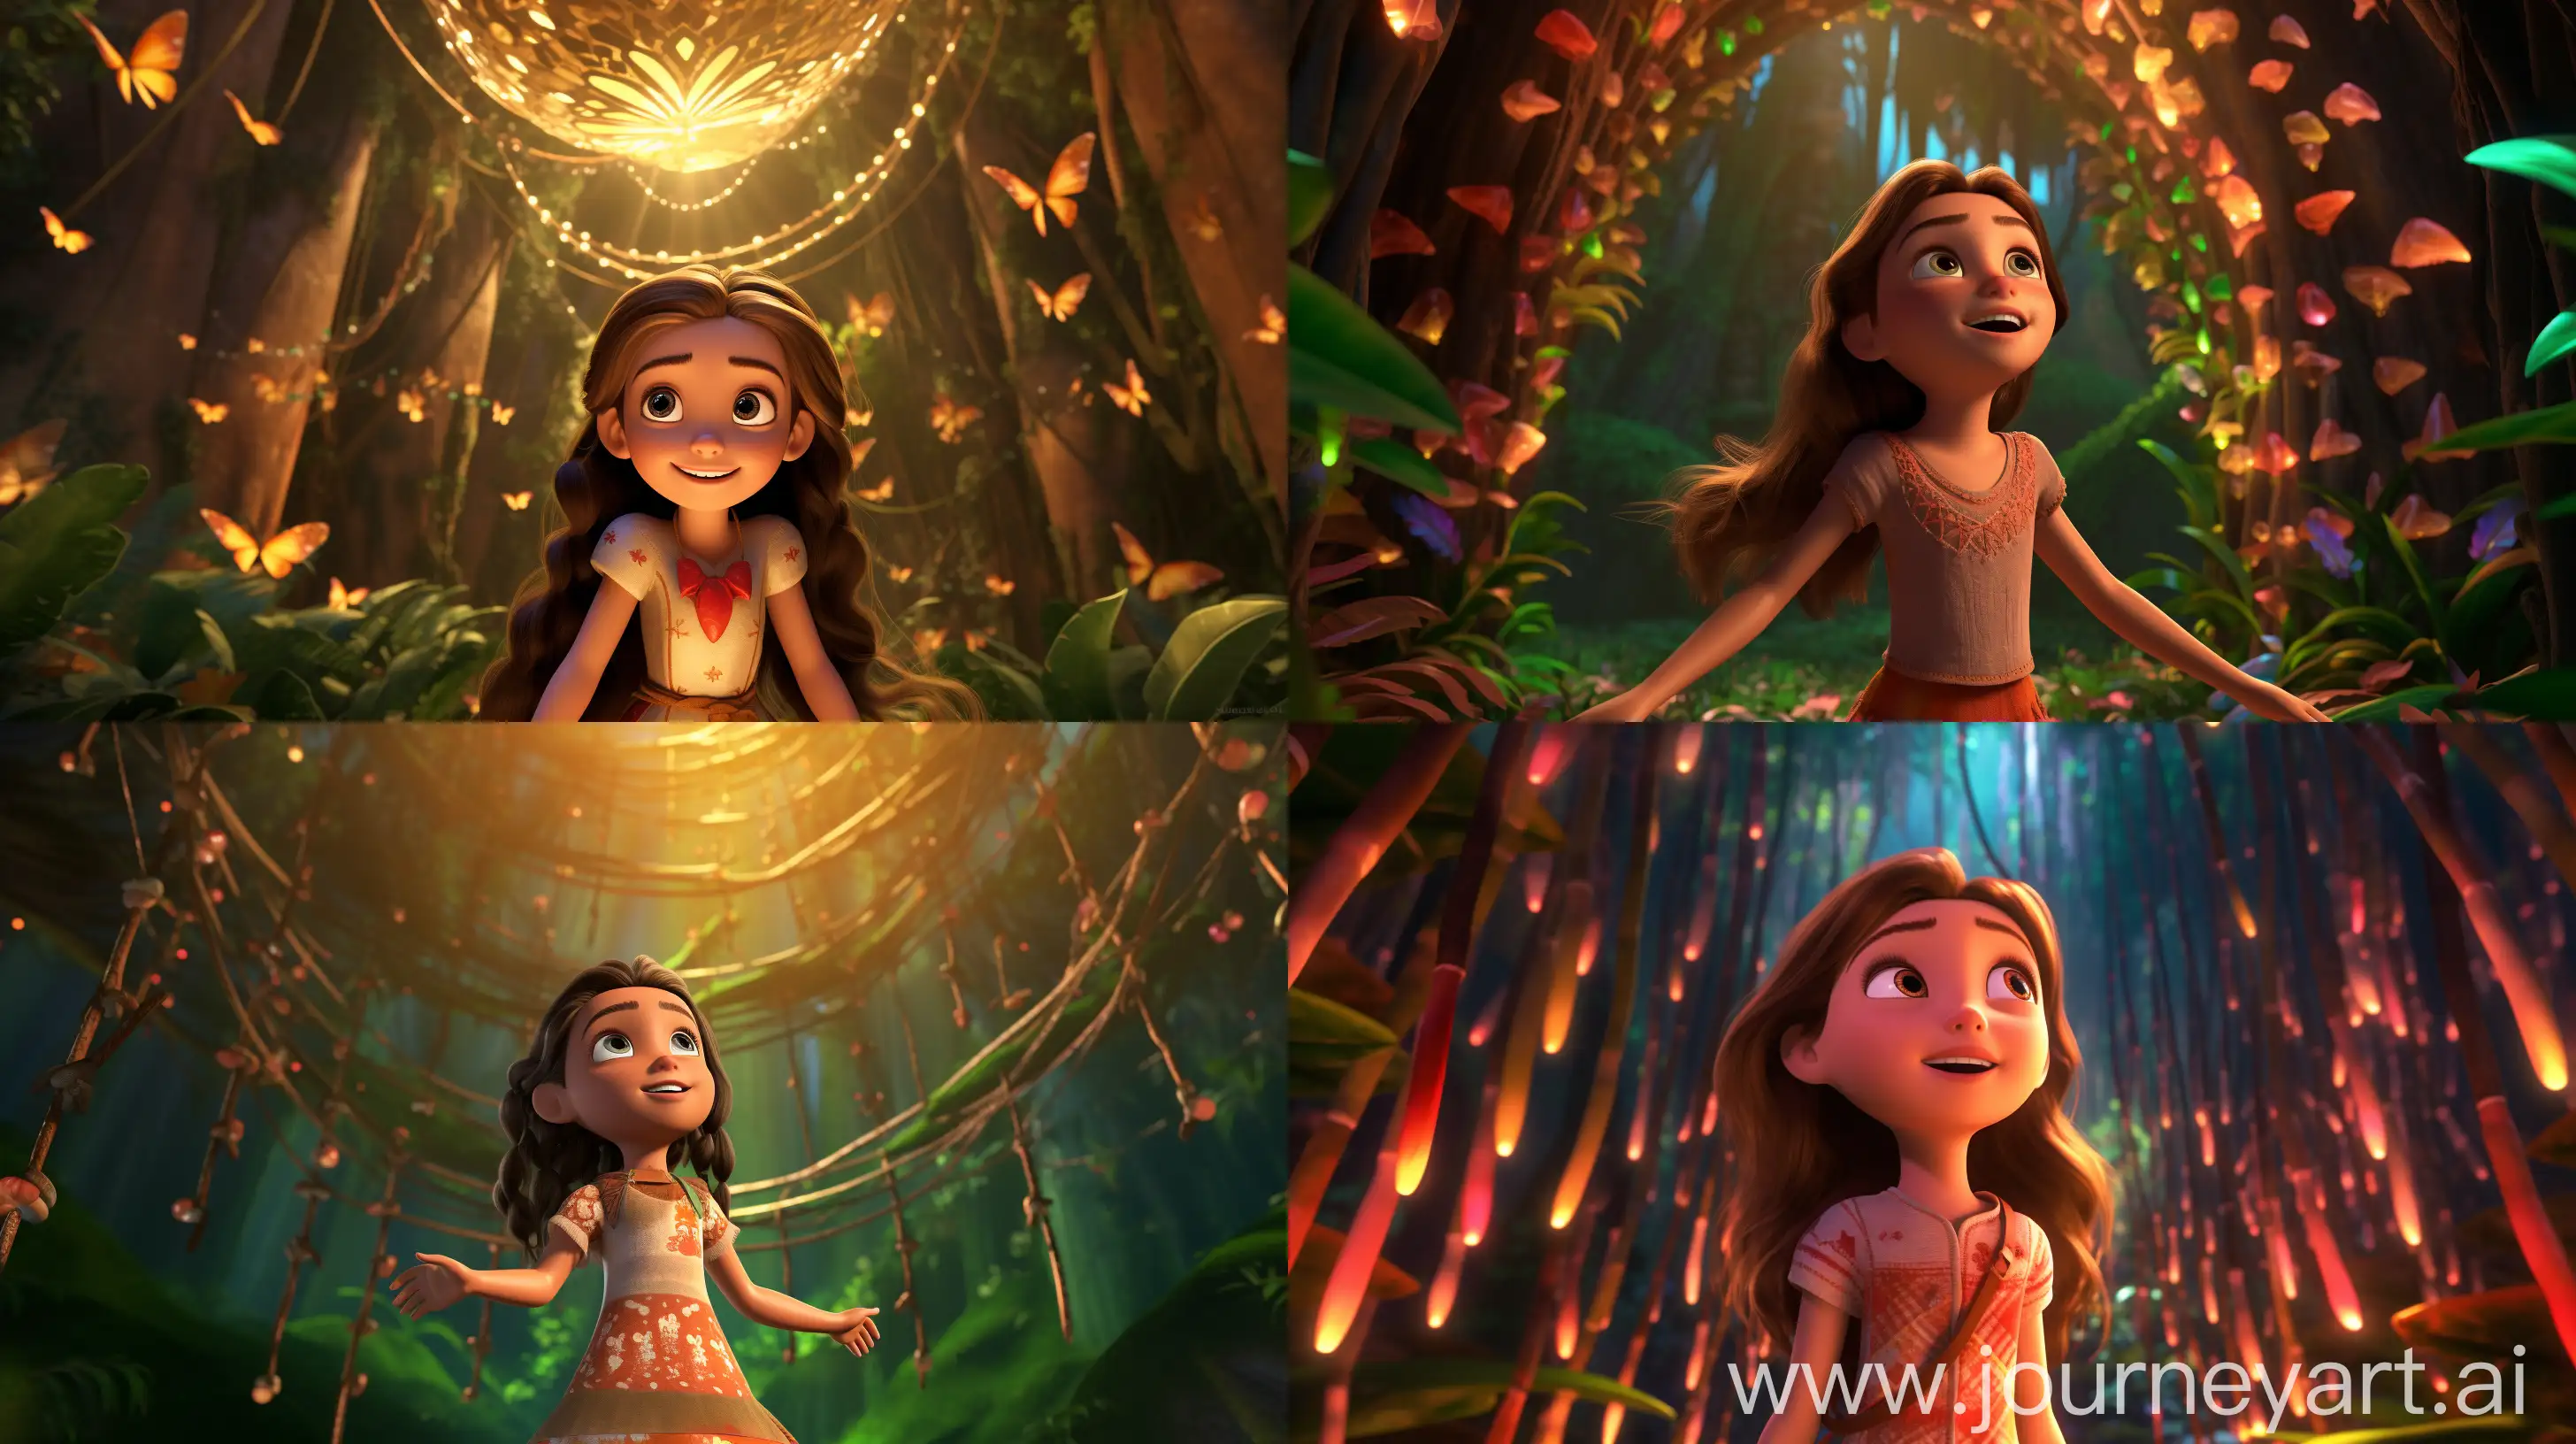 Enchanted-Forest-Adventure-Curious-Lily-Explores-Amidst-Magical-Light